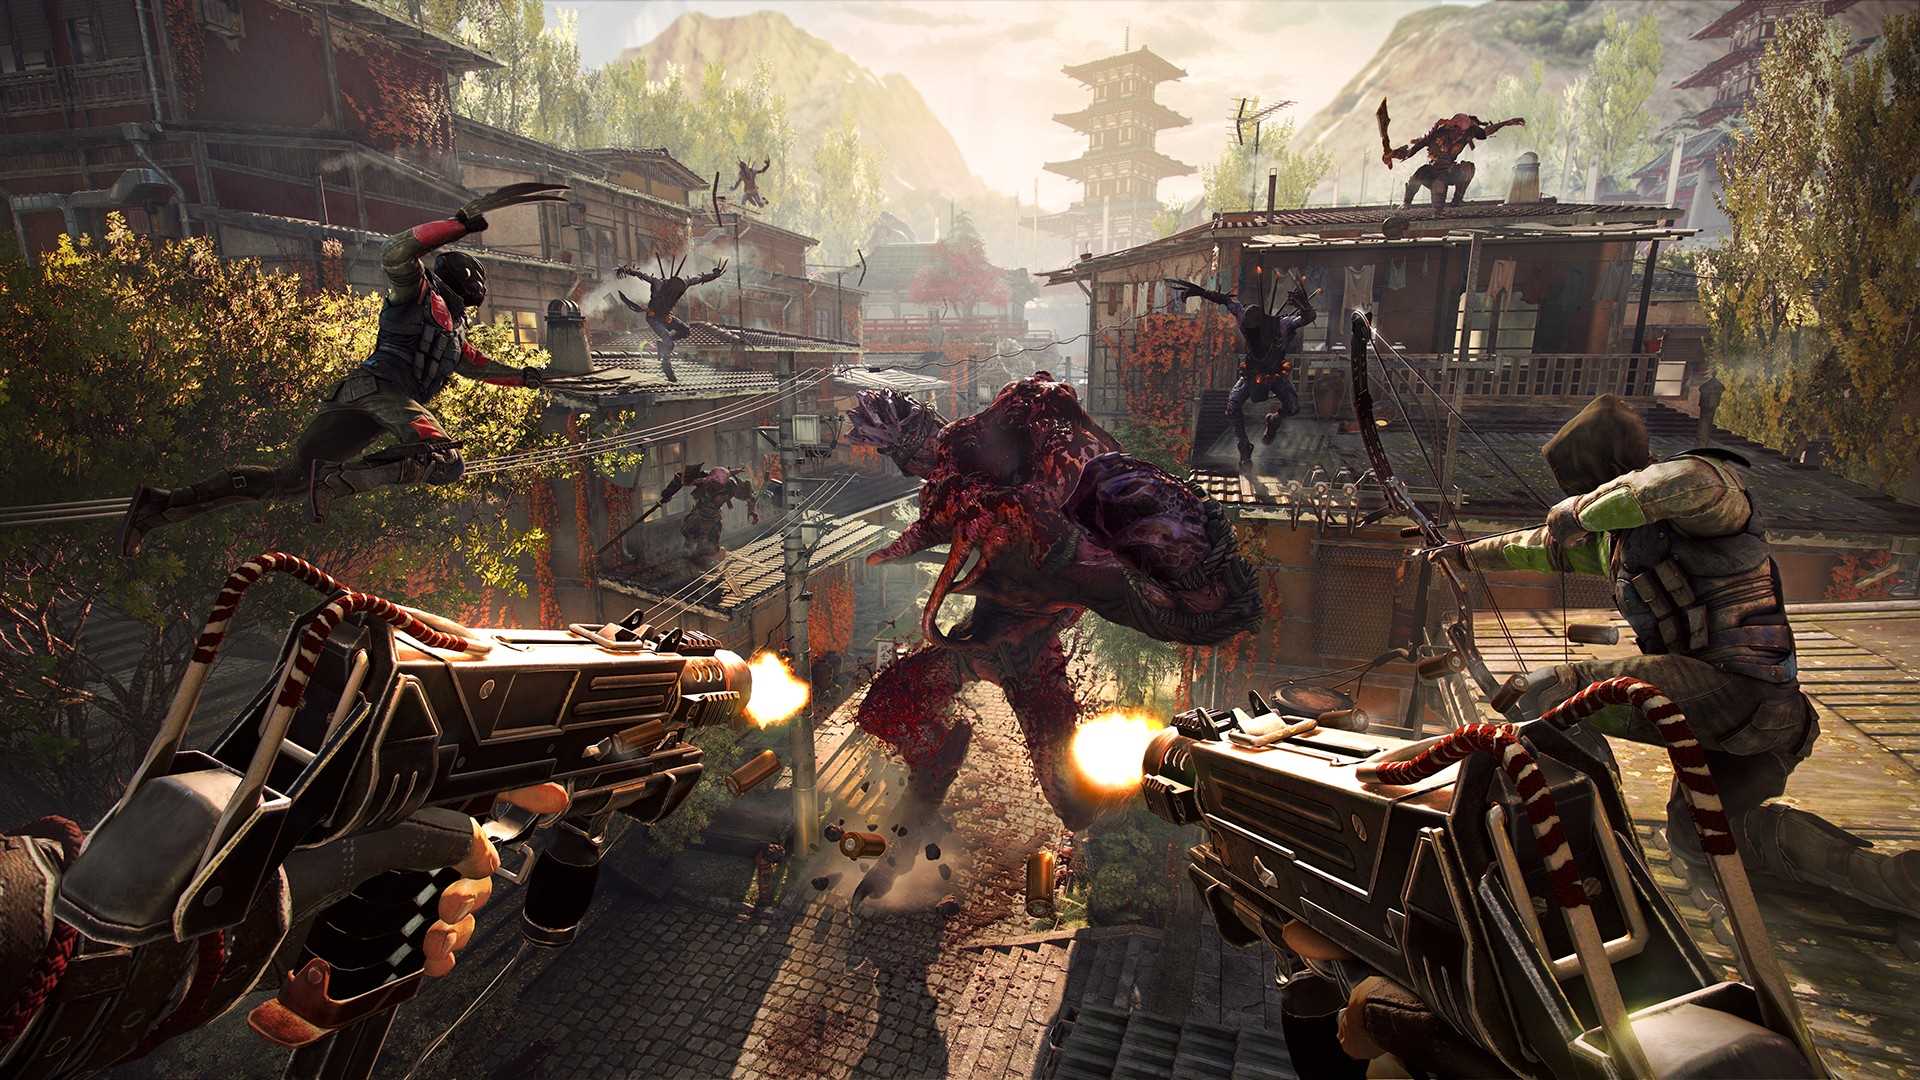 Shadow Warrior 3  PlayStation 4 - Limited Game News